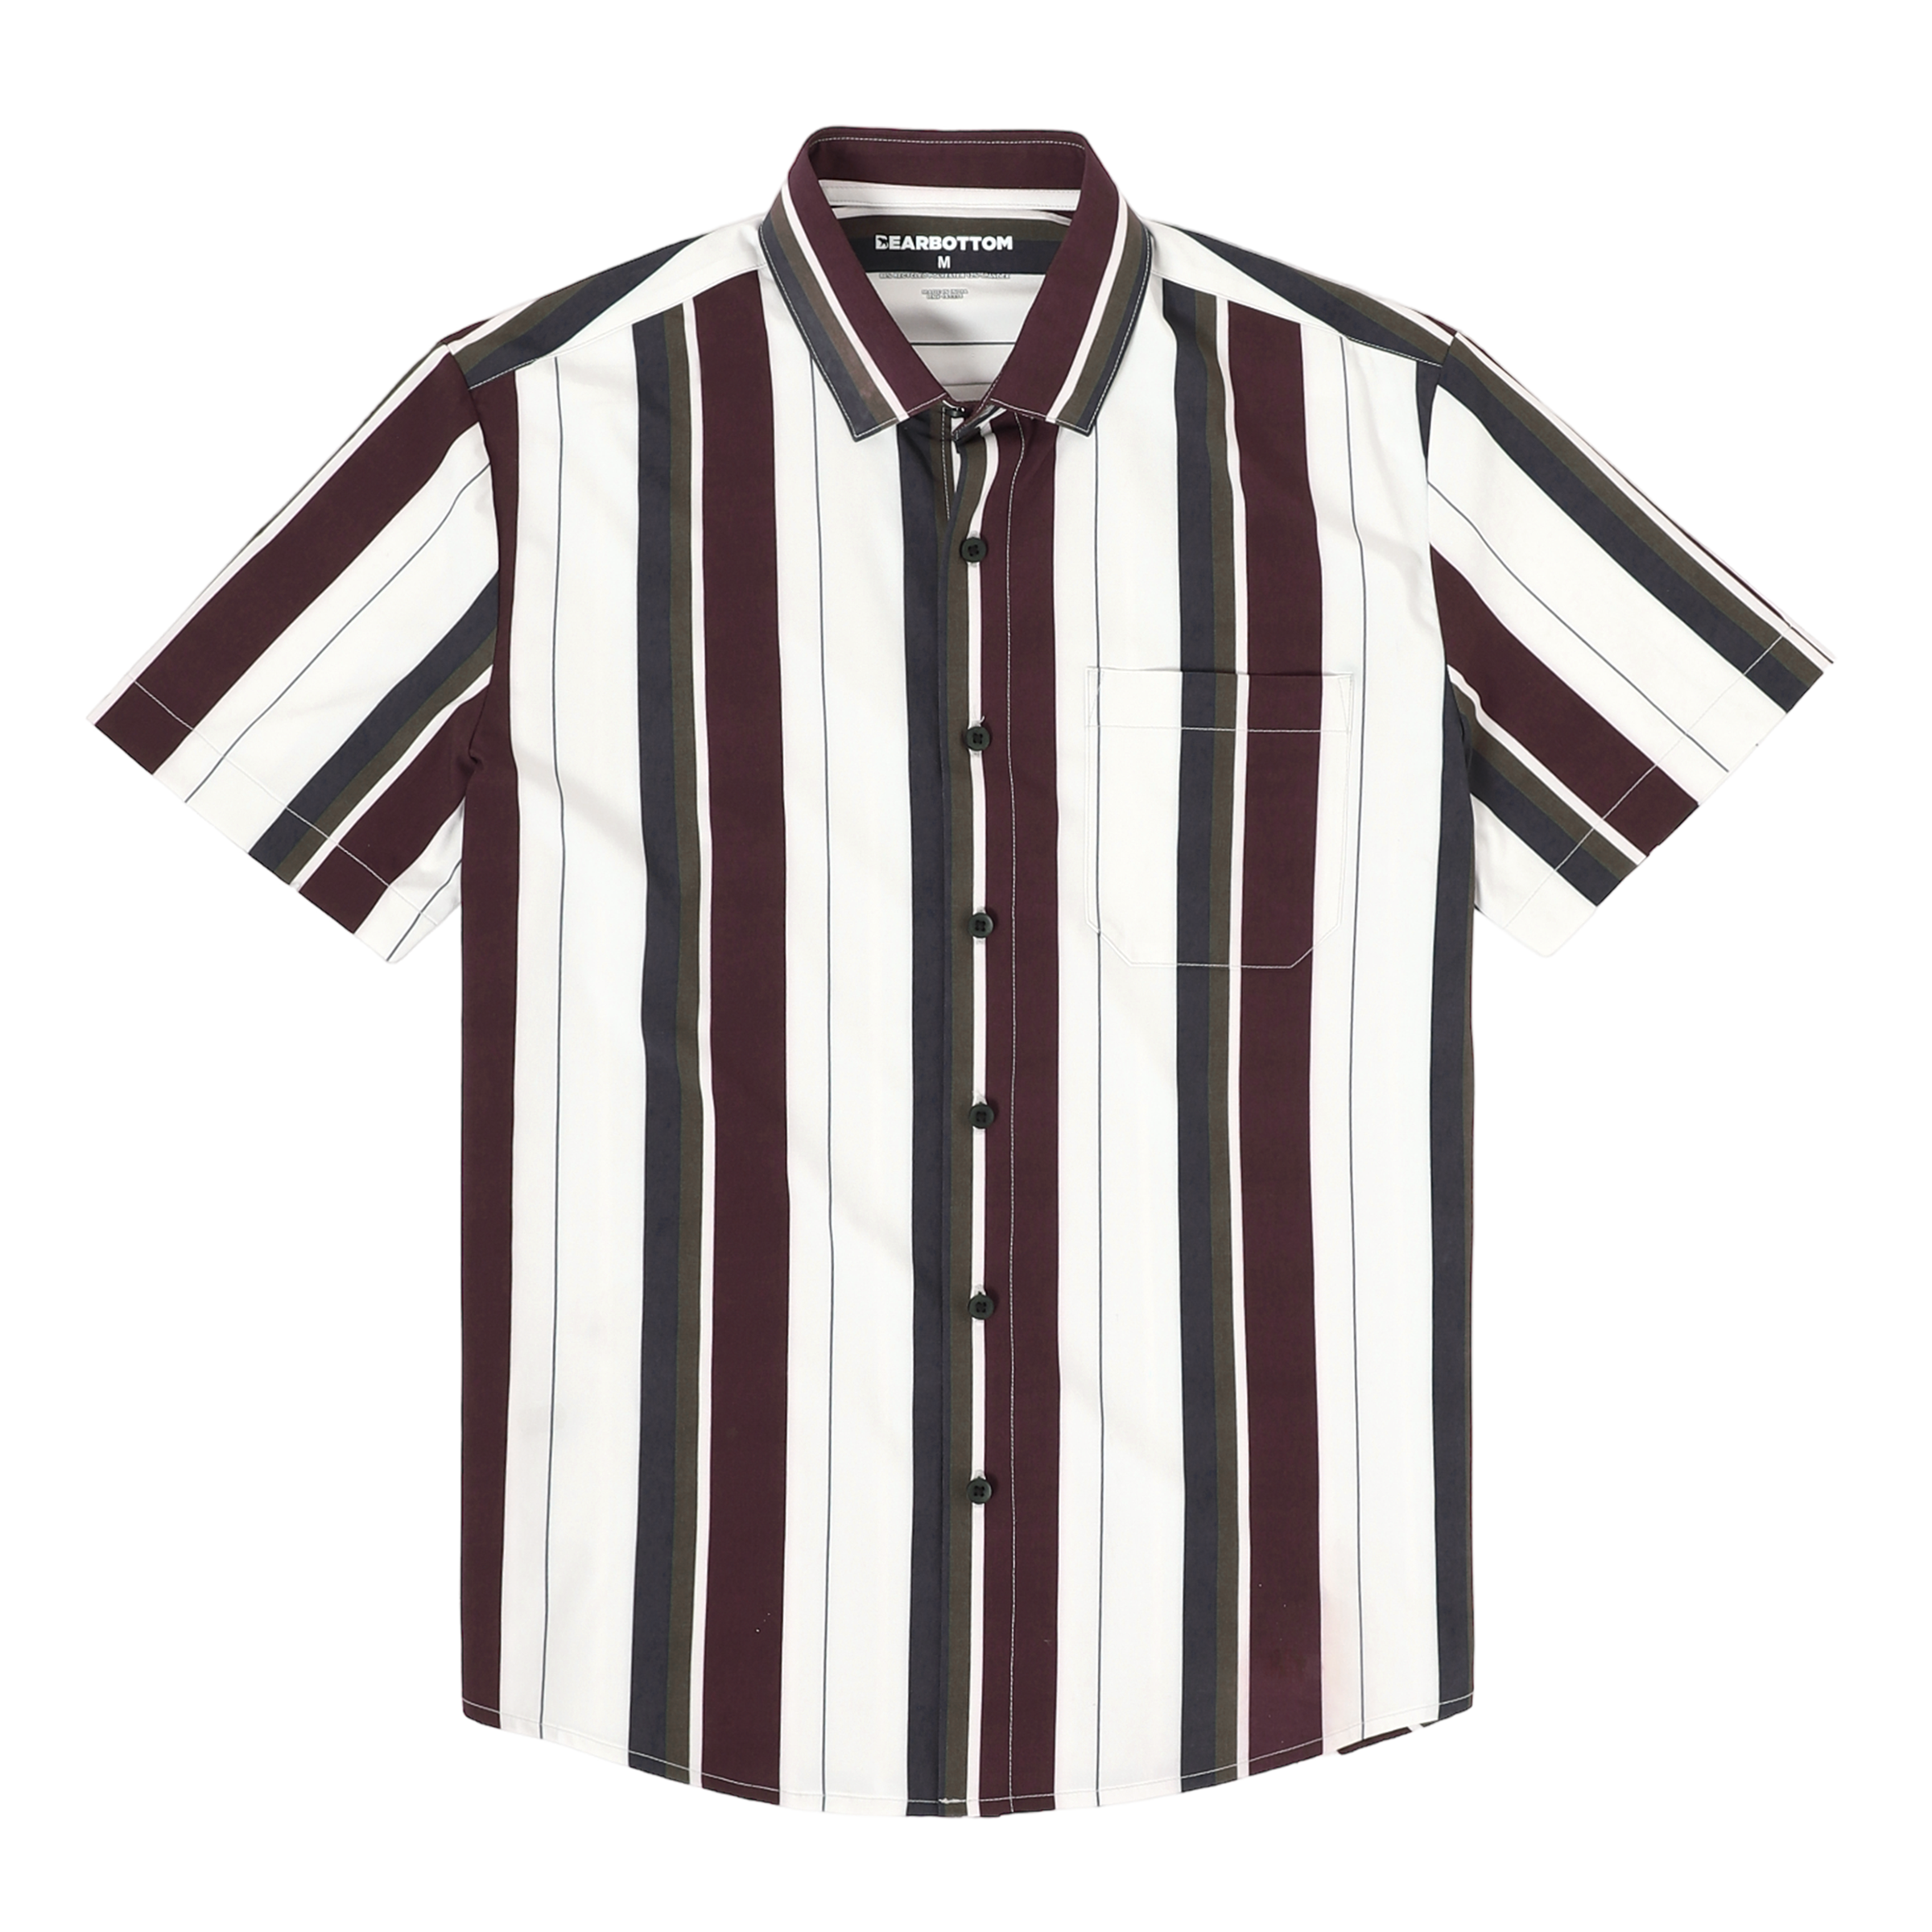 Cabana Shirt Vintage Stripe front, a white print with grey maroon and white stripes on a short sleeve button down collared shirt with a front left patch pocket